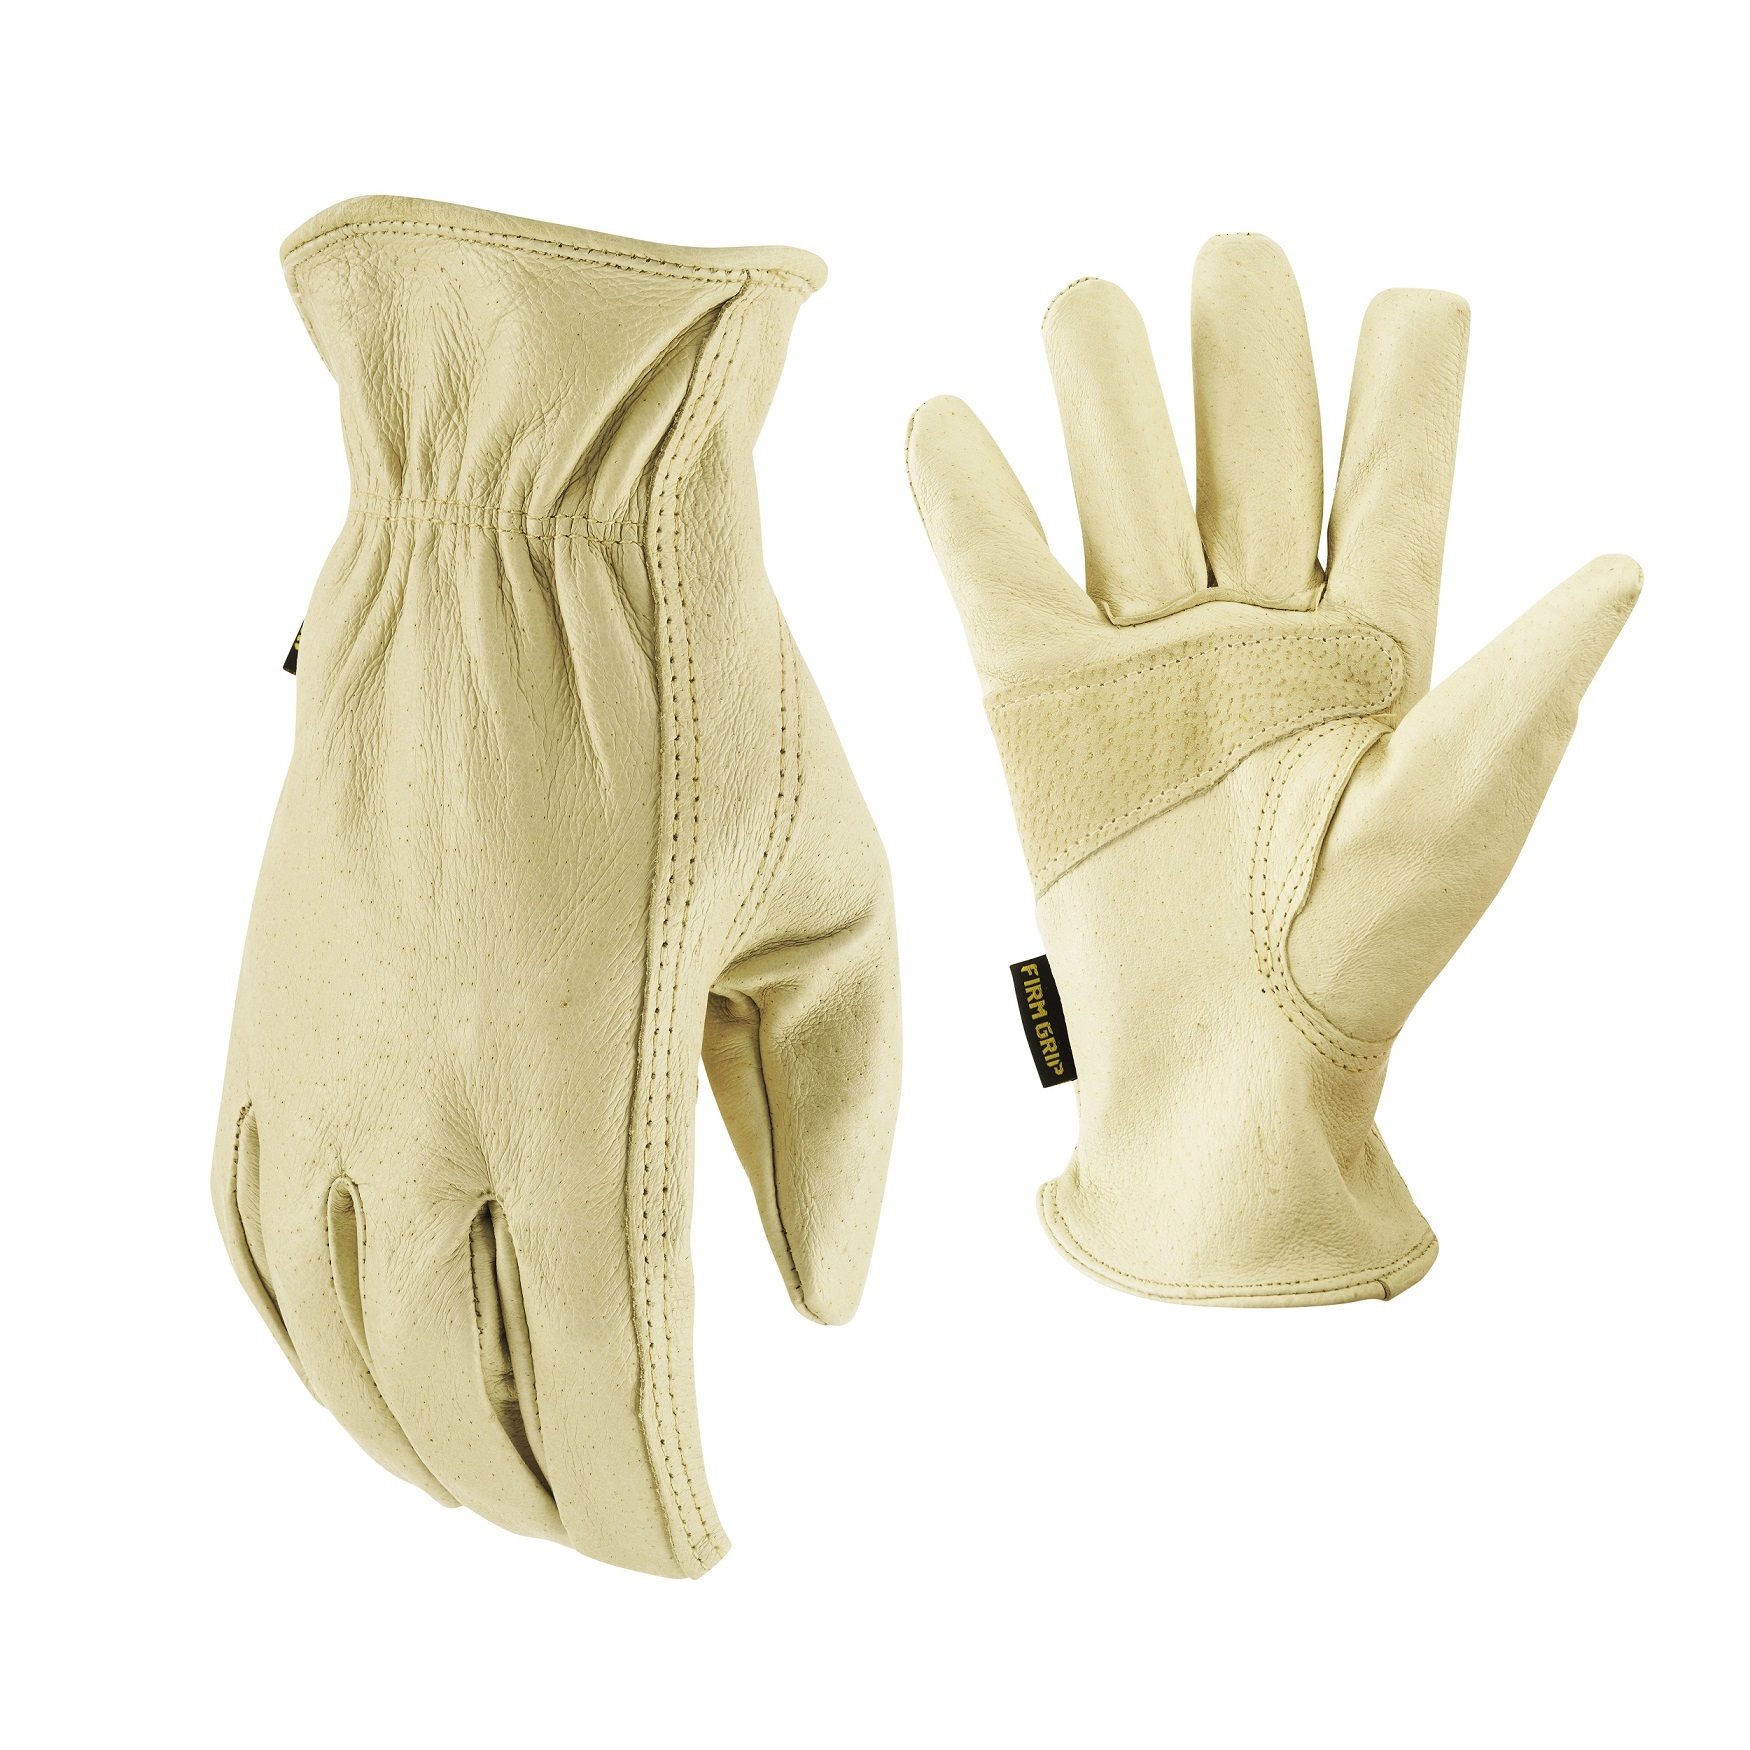 2 Pair) FIRM GRIP Large Winter Utility Gloves with Thinsulate